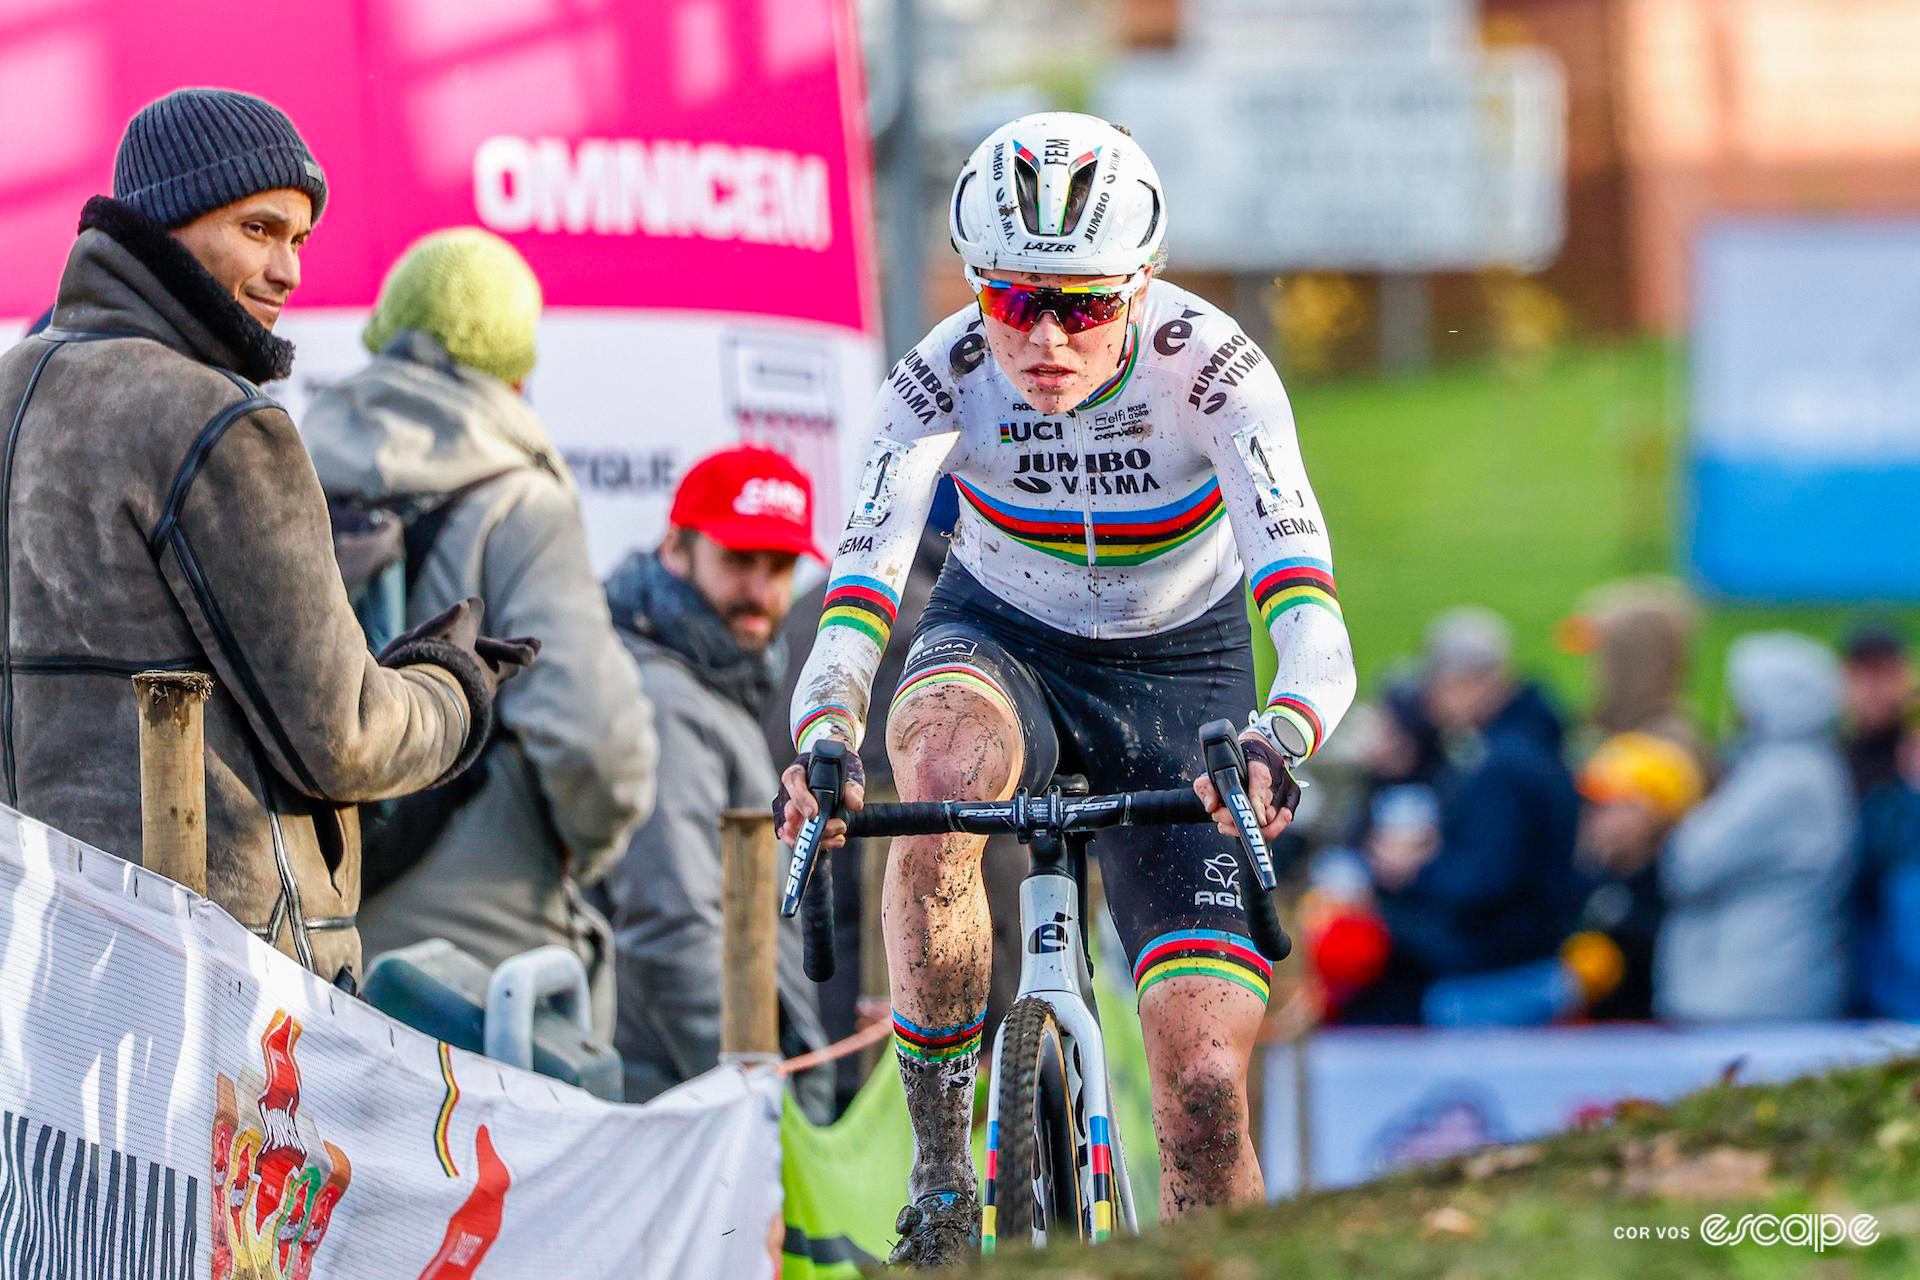 Fem van Empel rides alone in the lead of the X20 Trofee Kortrijk, mud splattering her world champion's kit detailed with rainbow bands.